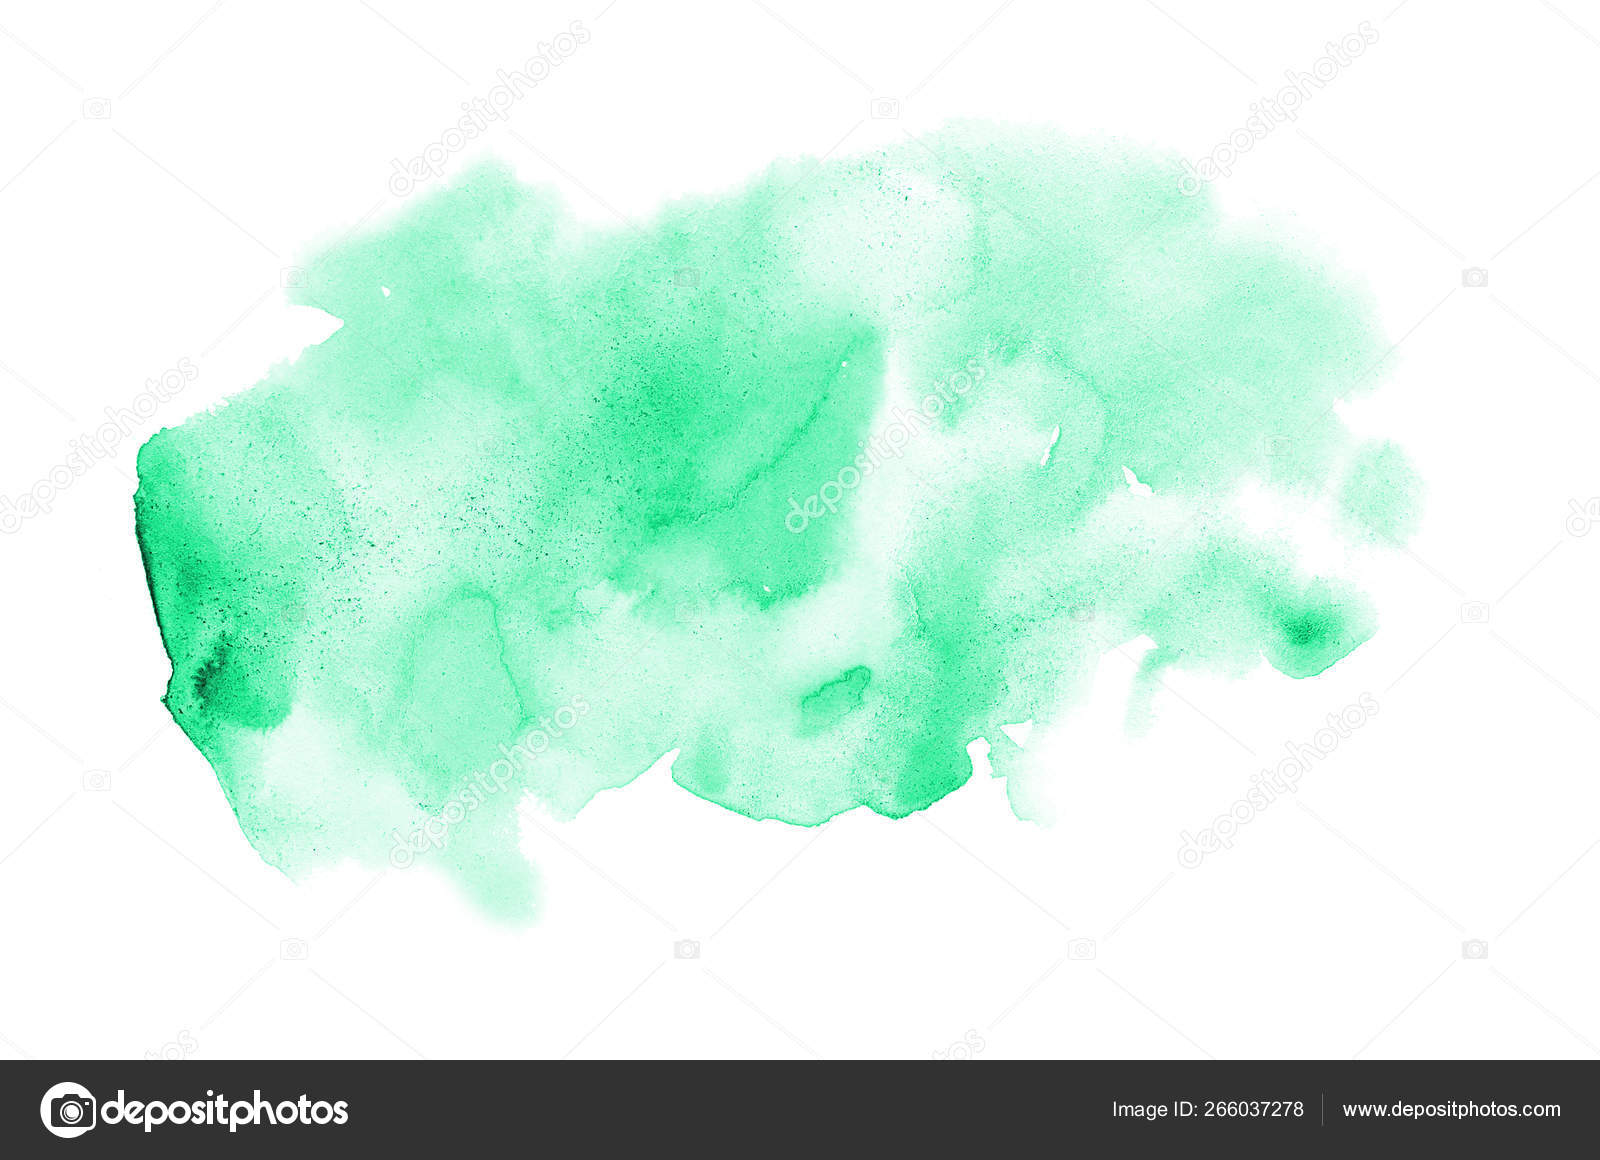 Abstract watercolor background image with a liquid splatter of